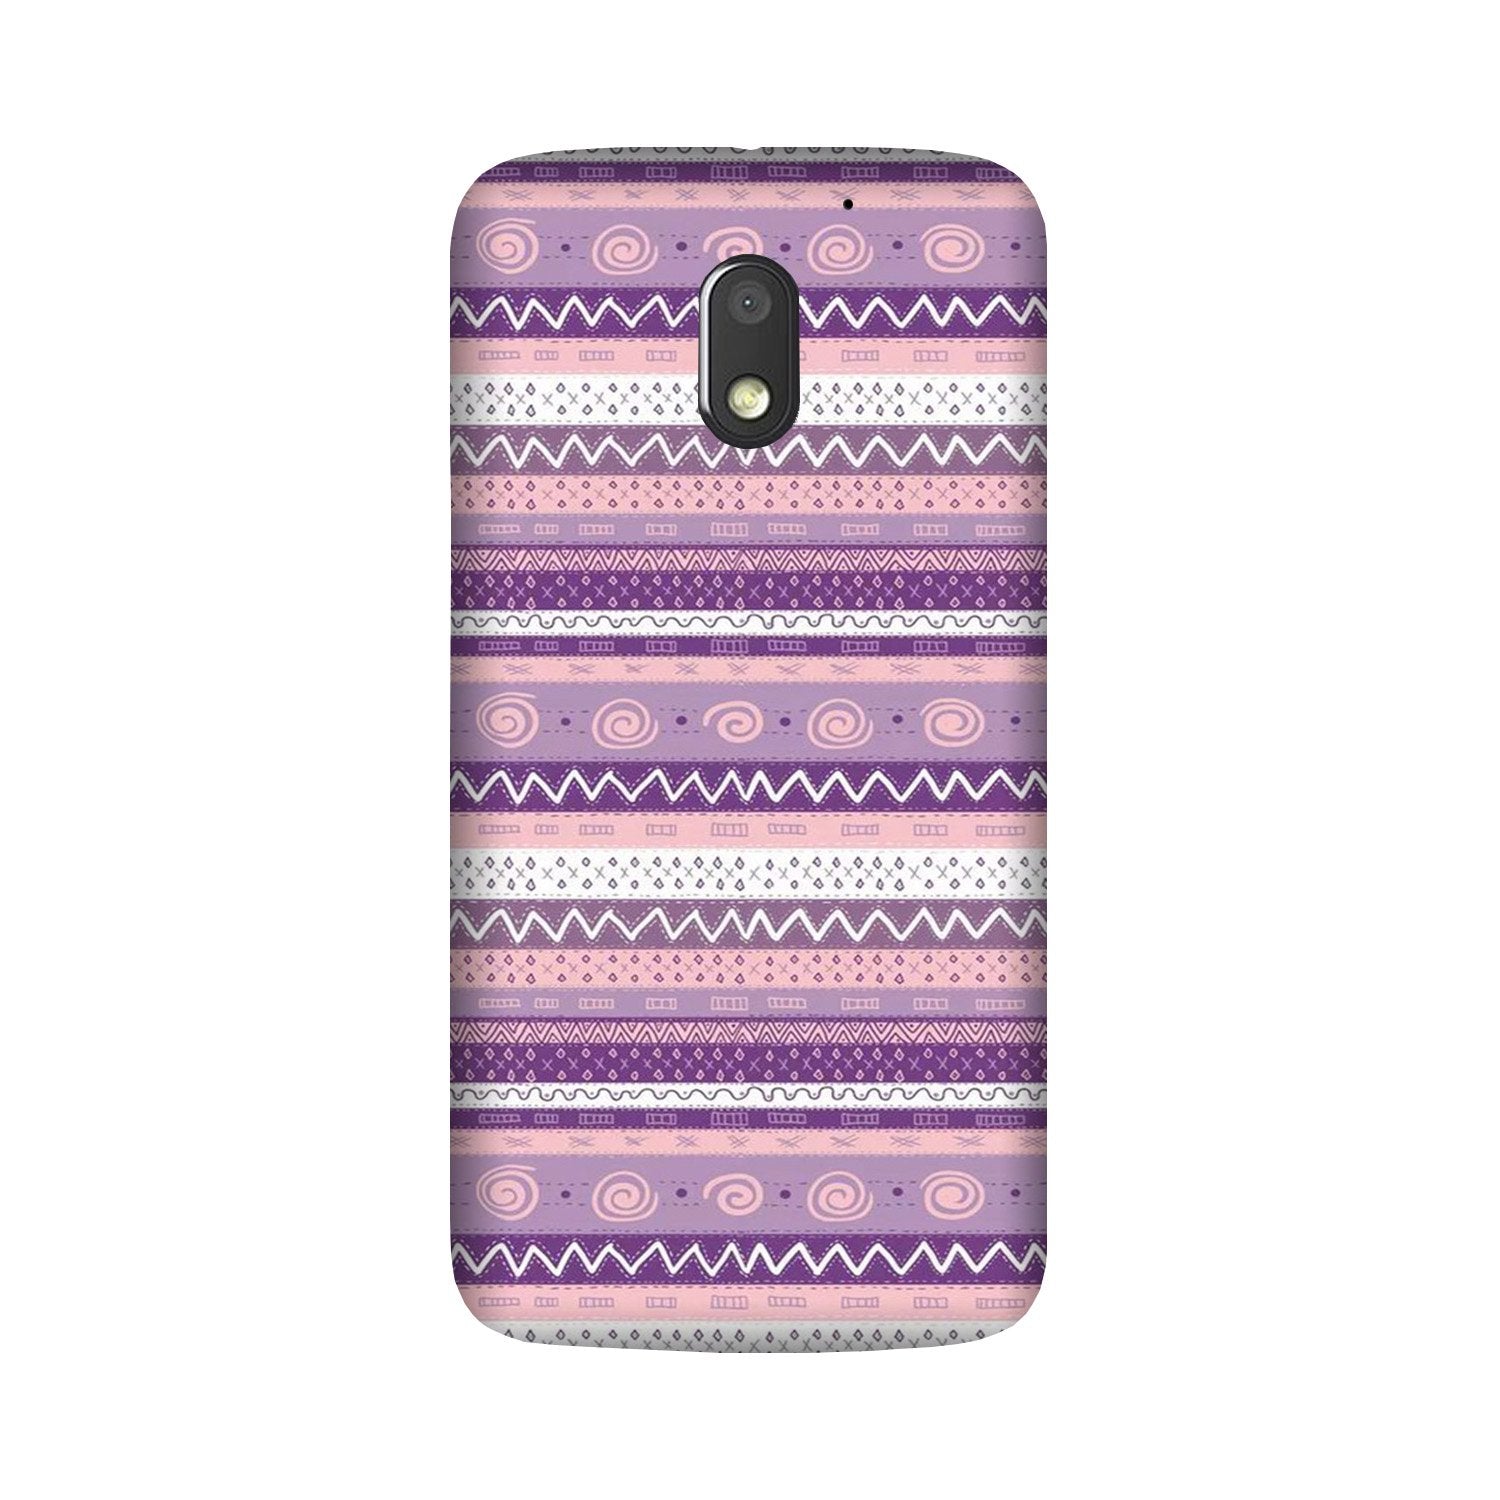 Zigzag line pattern3 Case for Moto G4 Play